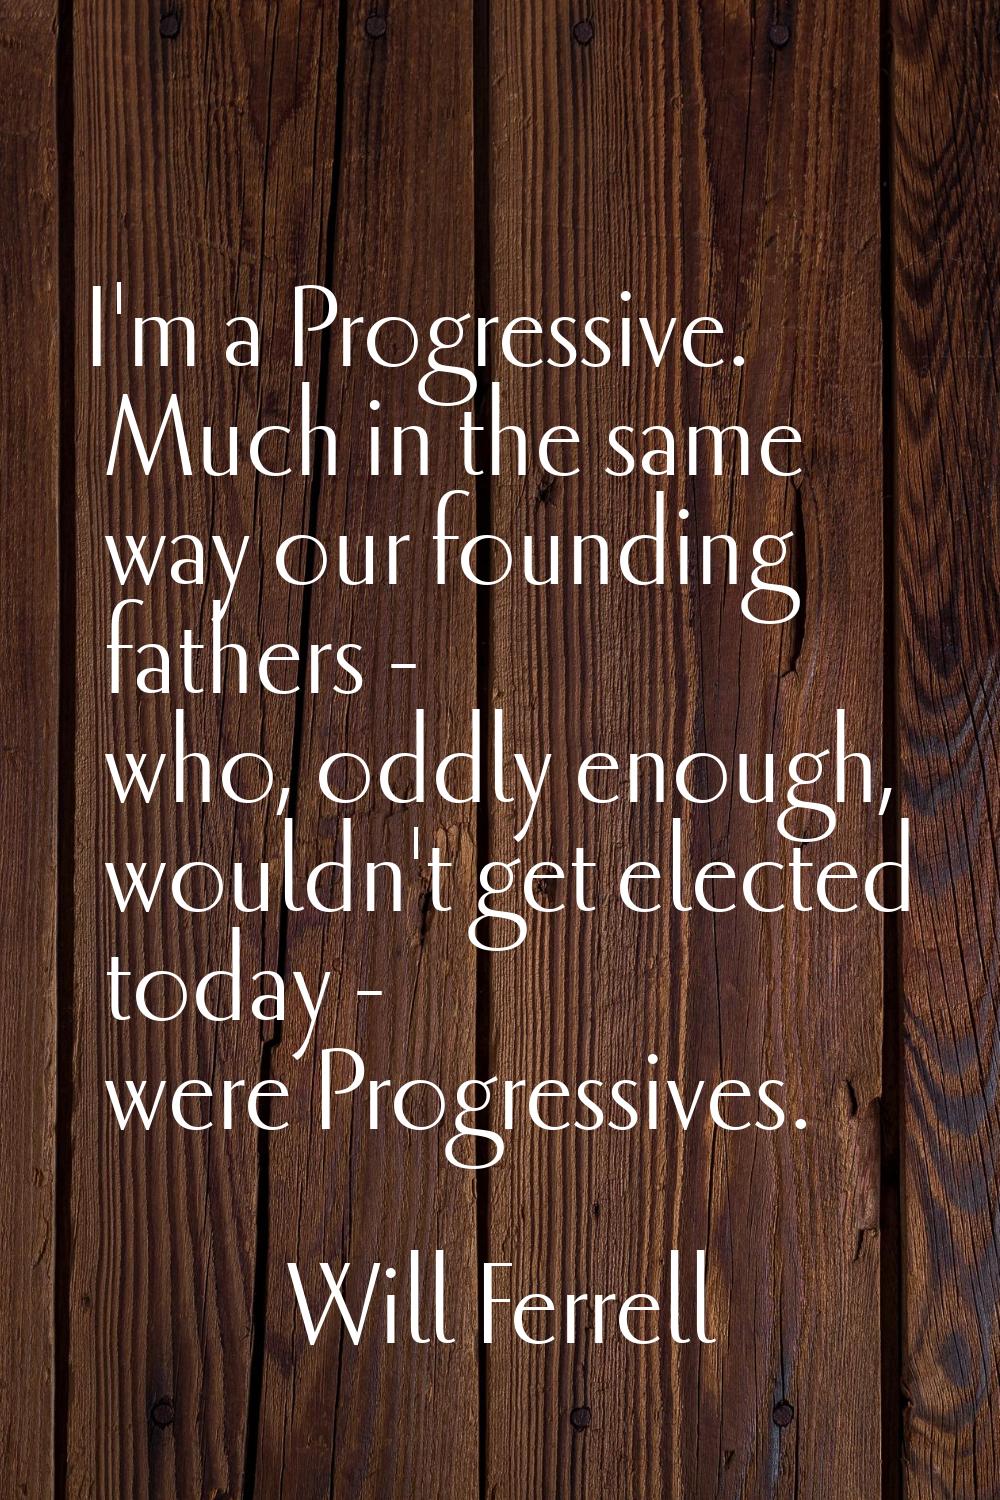 I'm a Progressive. Much in the same way our founding fathers - who, oddly enough, wouldn't get elec